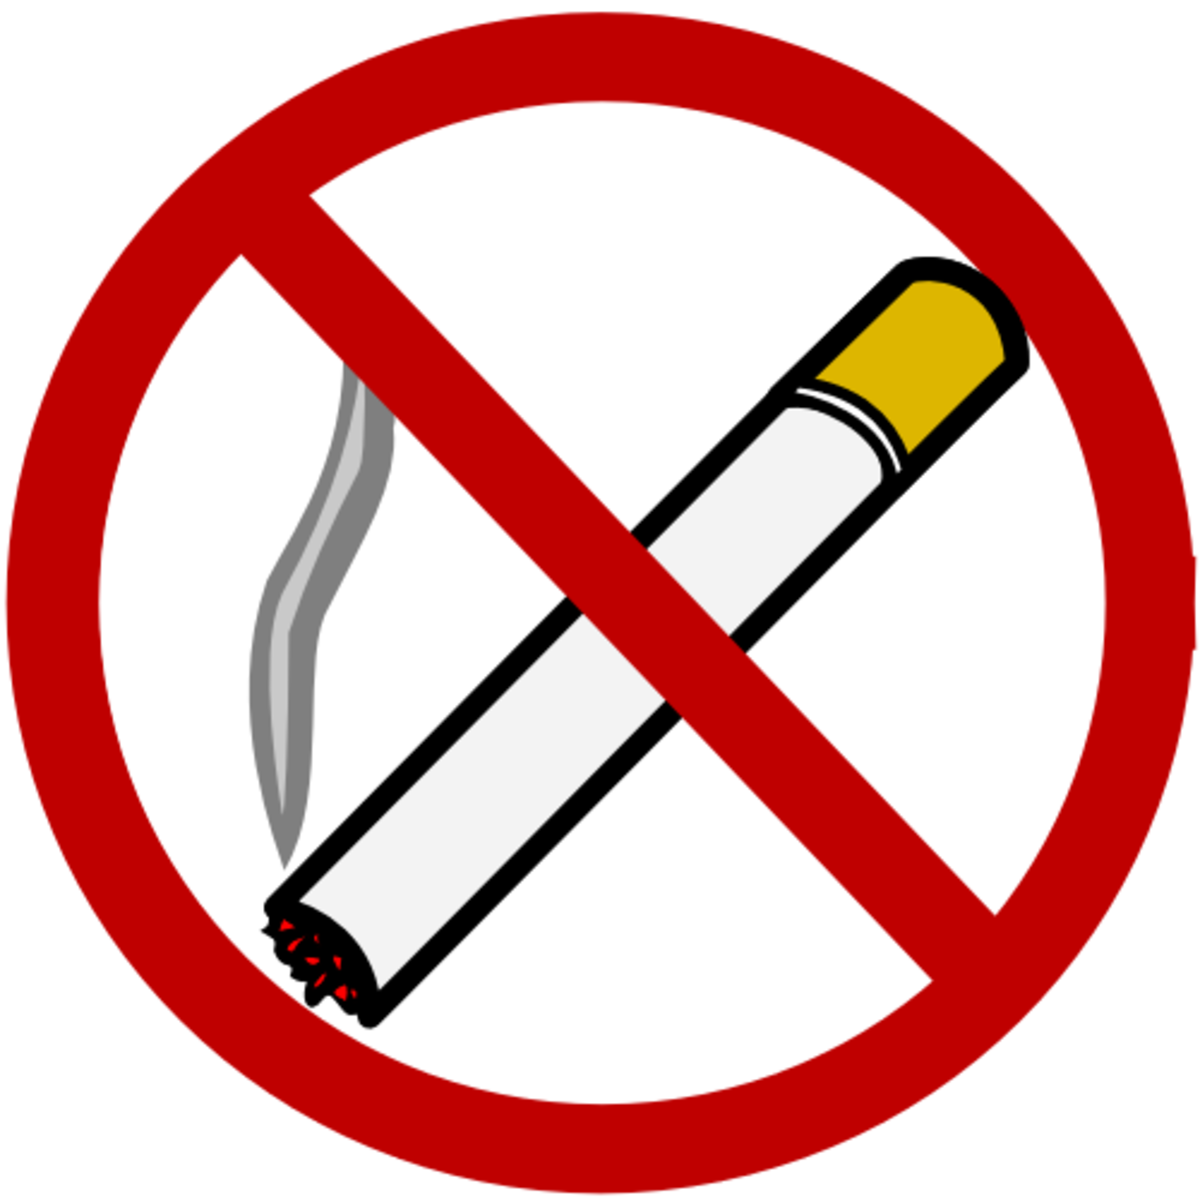 should cigarette advertising be banned essay